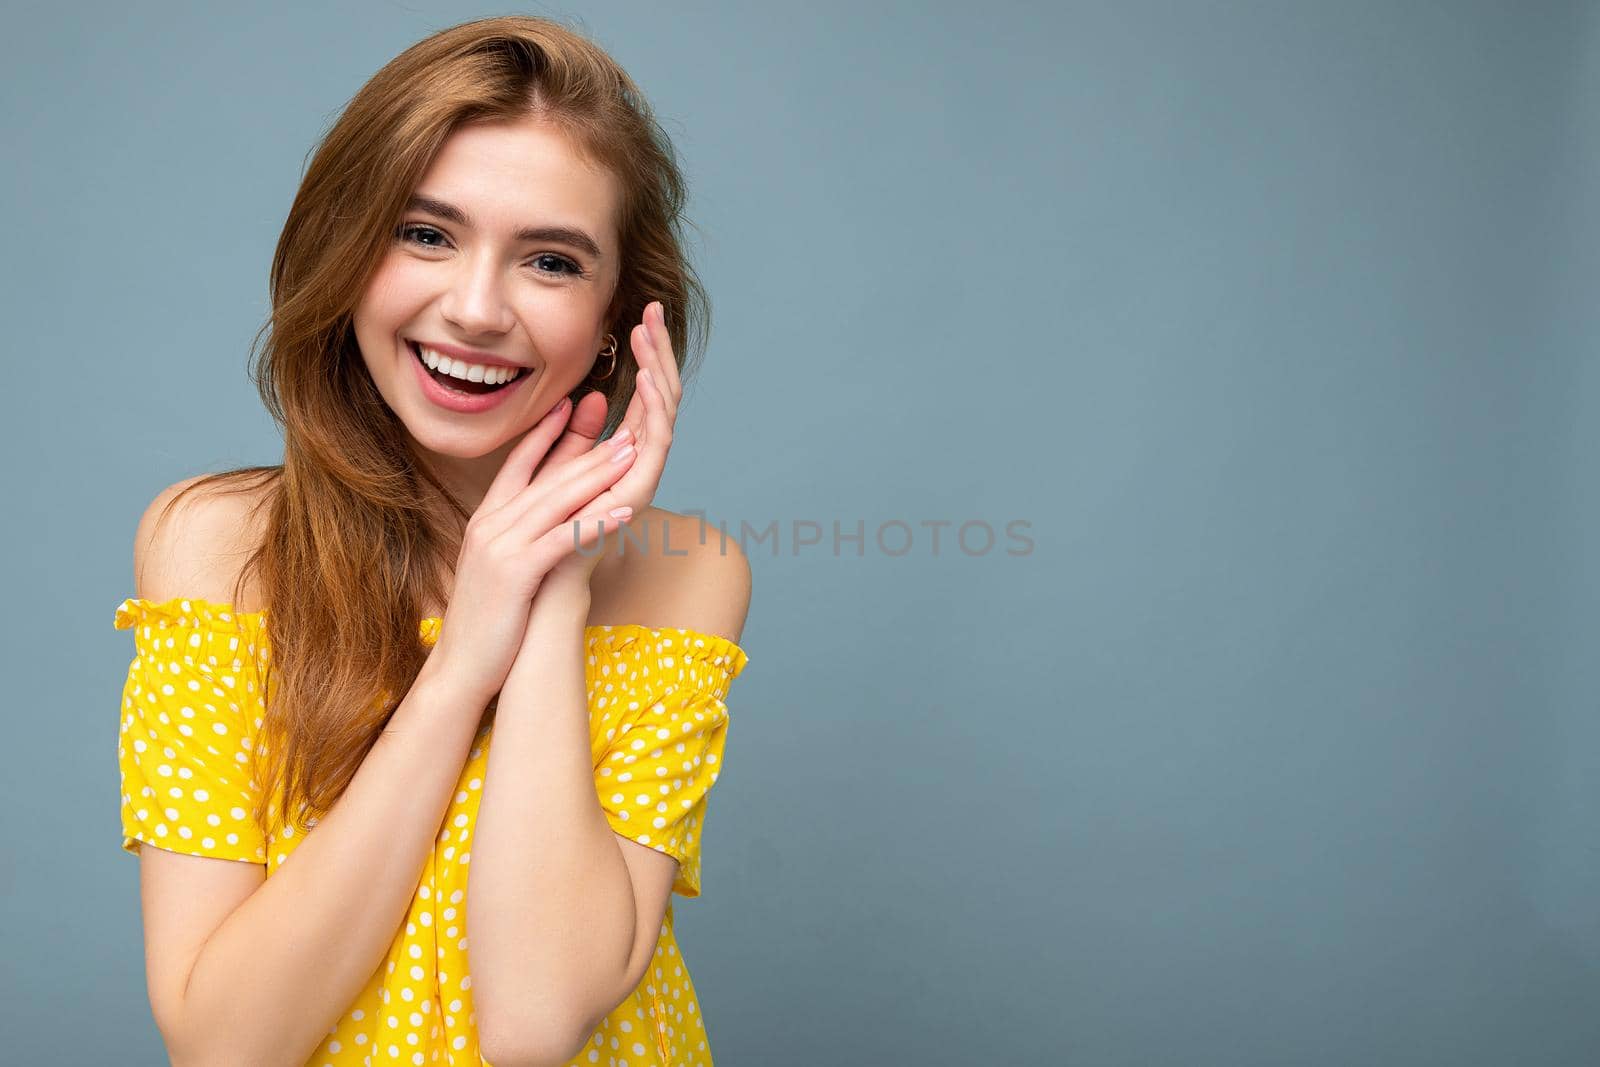 Laughing smiling young beautiful dark blonde woman with sincere emotions isolated on background wall with copy space wearing stylish summer yellow dress. Positive concept.